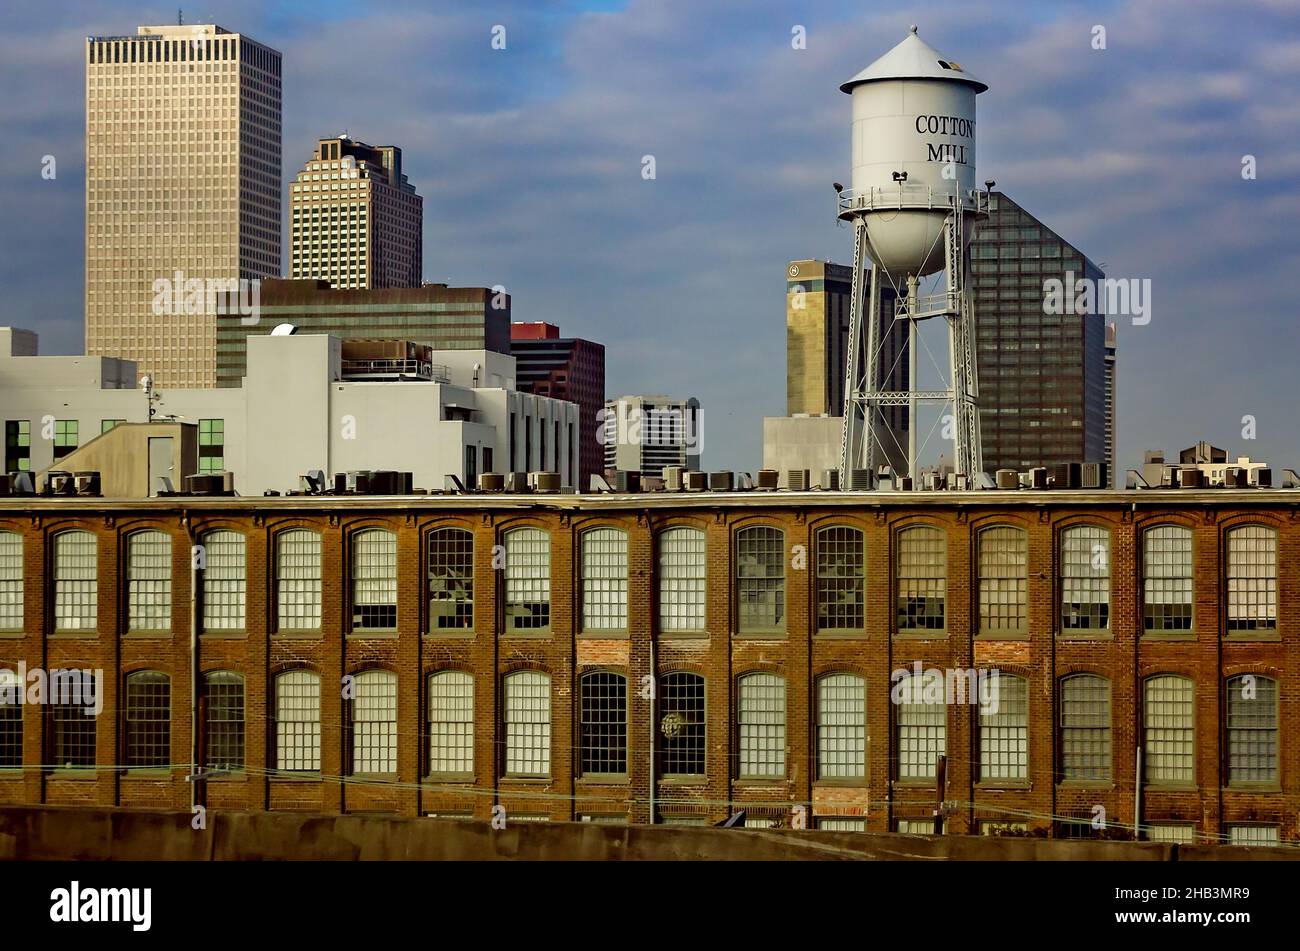 The Cotton Mill, which features a residential community in the old Maginnis Cotton Mill, is pictured, Dec. 13, 2021, in New Orleans, Louisiana. Stock Photo